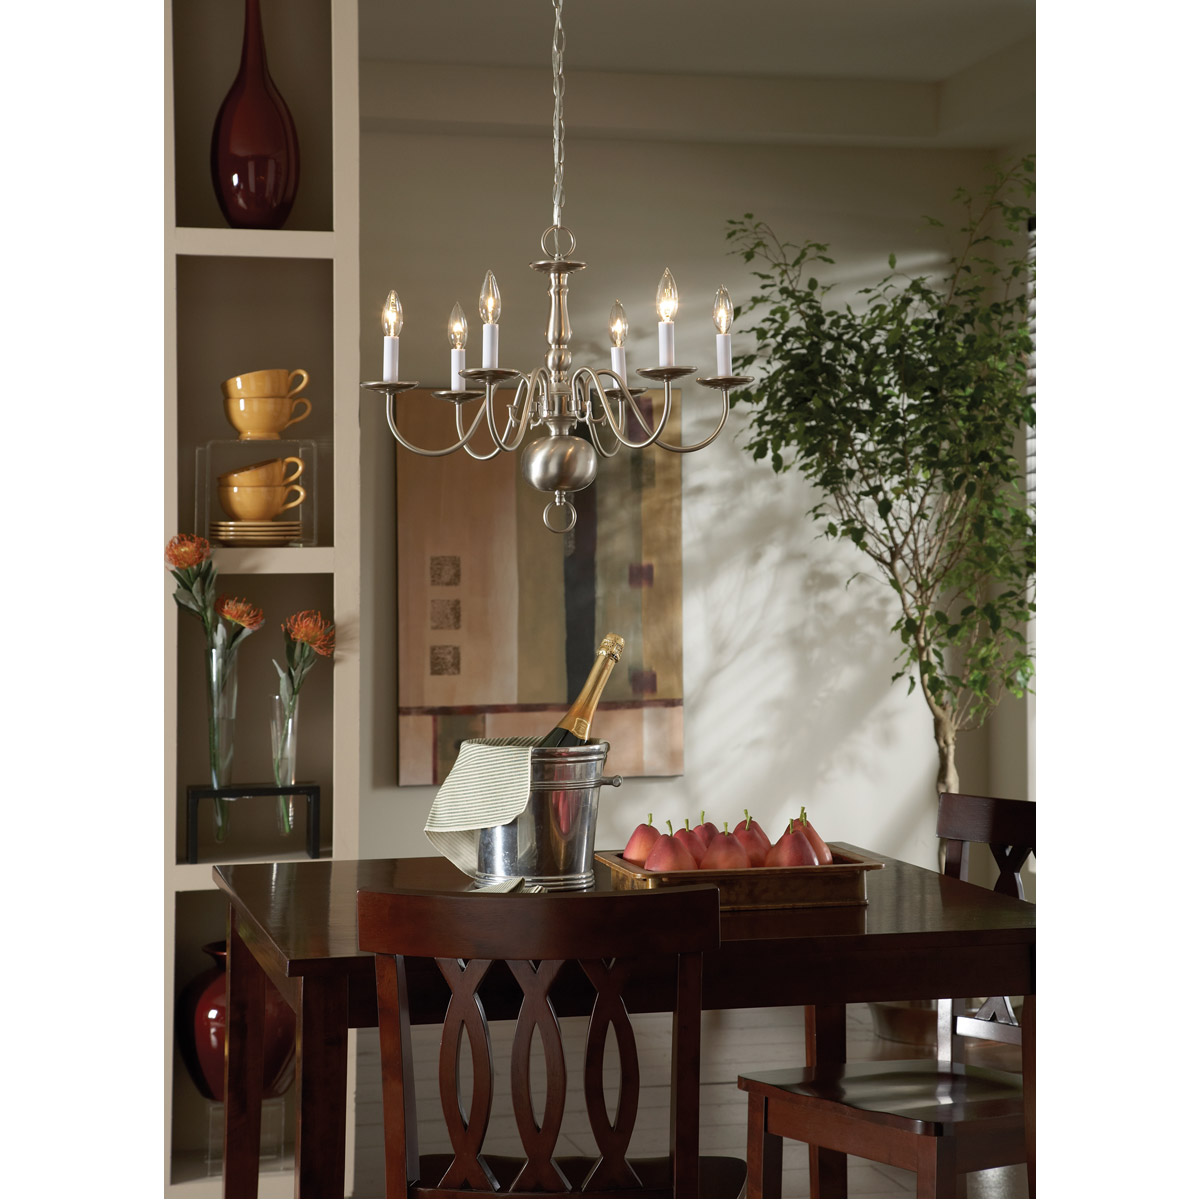 Sea Gull 3411-962 Traditional 6 Light 24 inch Brushed Nickel Chandelier Ceiling Light TRADITIONAL_DINING_INDOOR.jpg